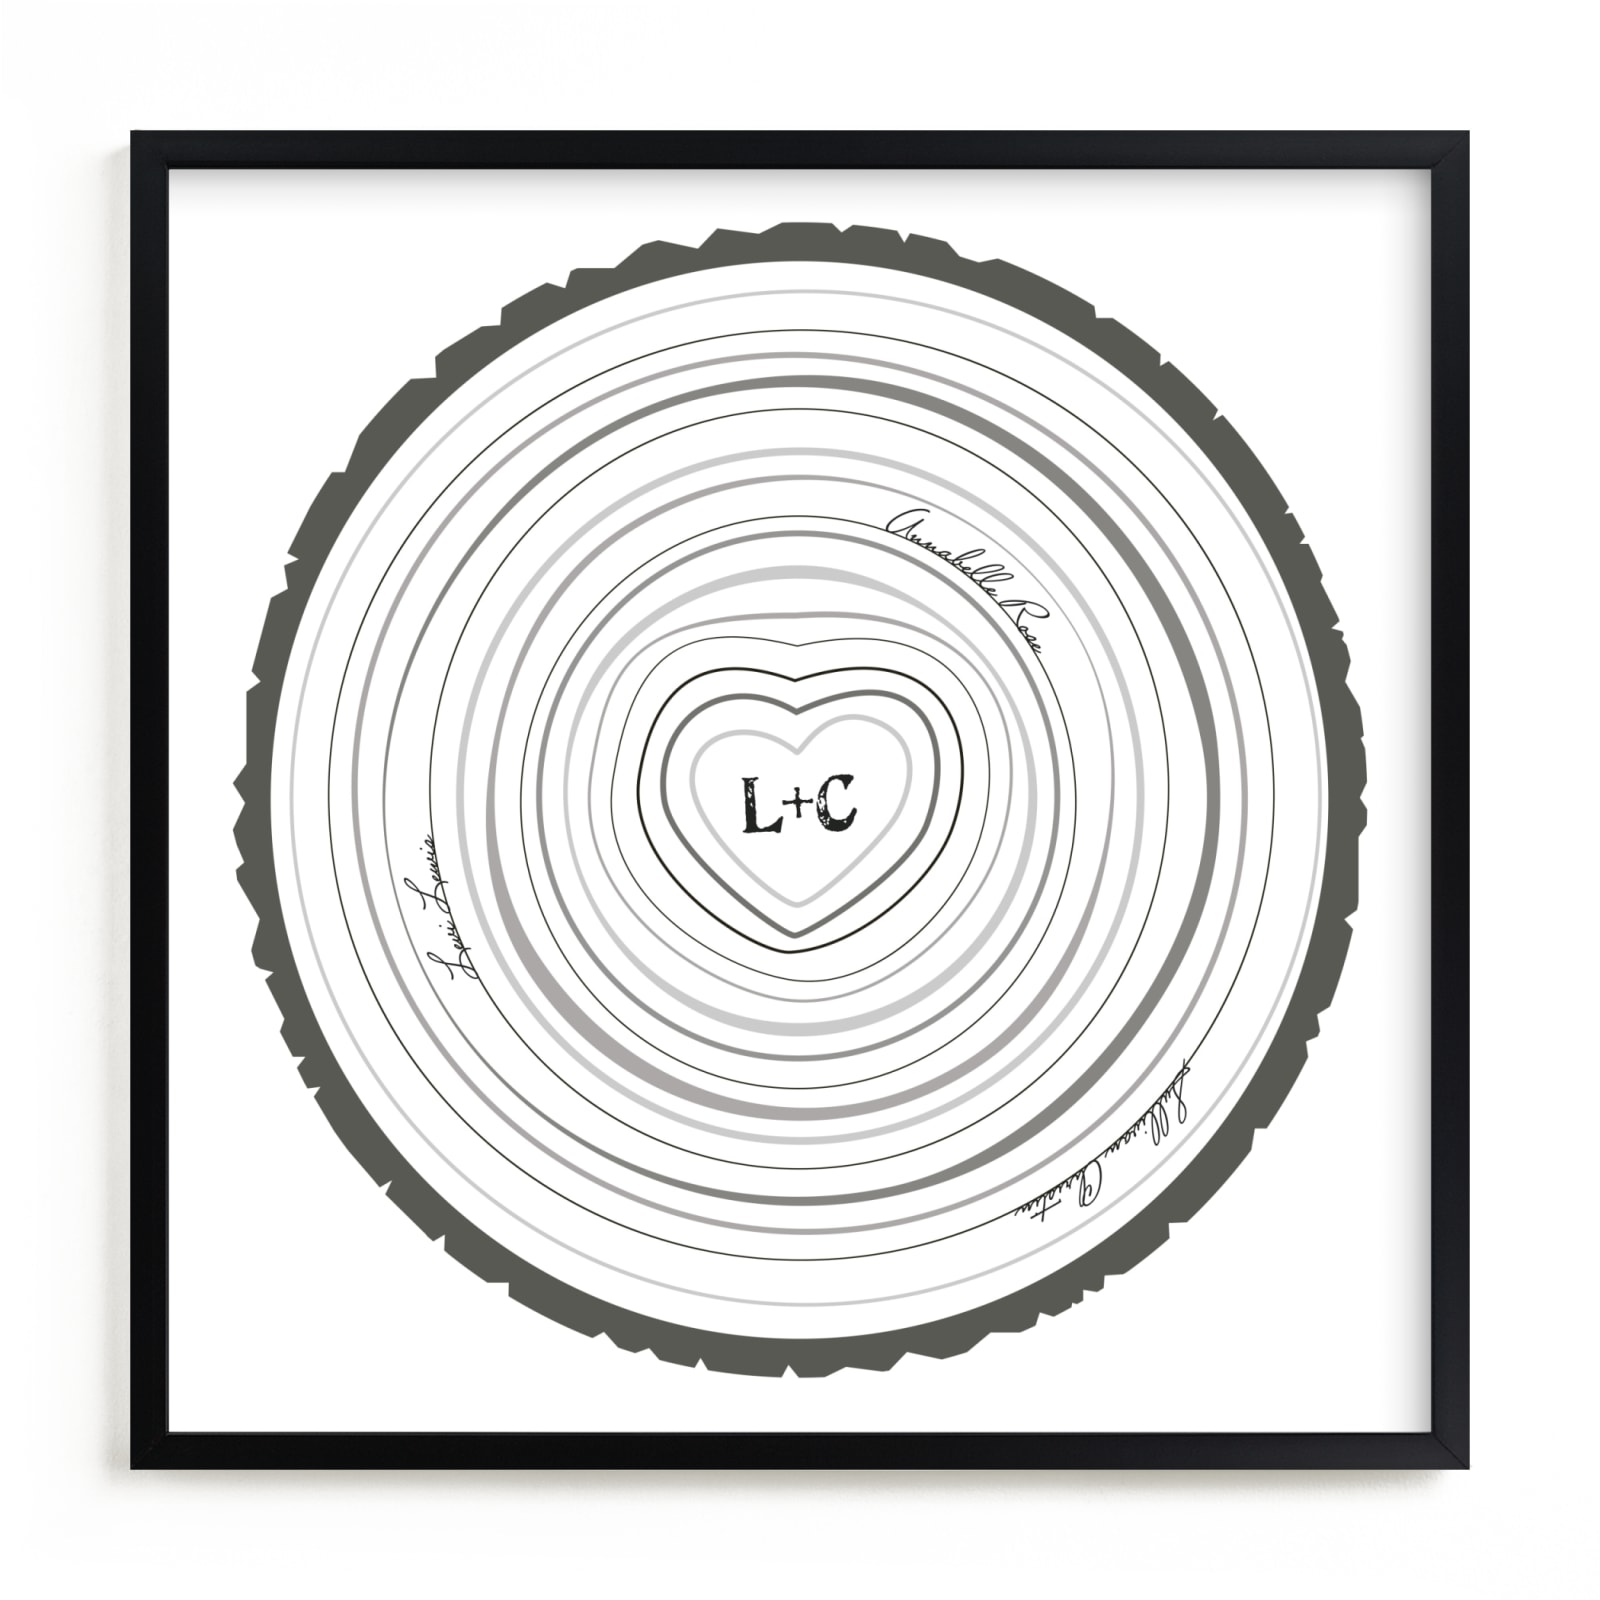 This is a black nursery wall art by Jessie Steury called Family Tree Rings.